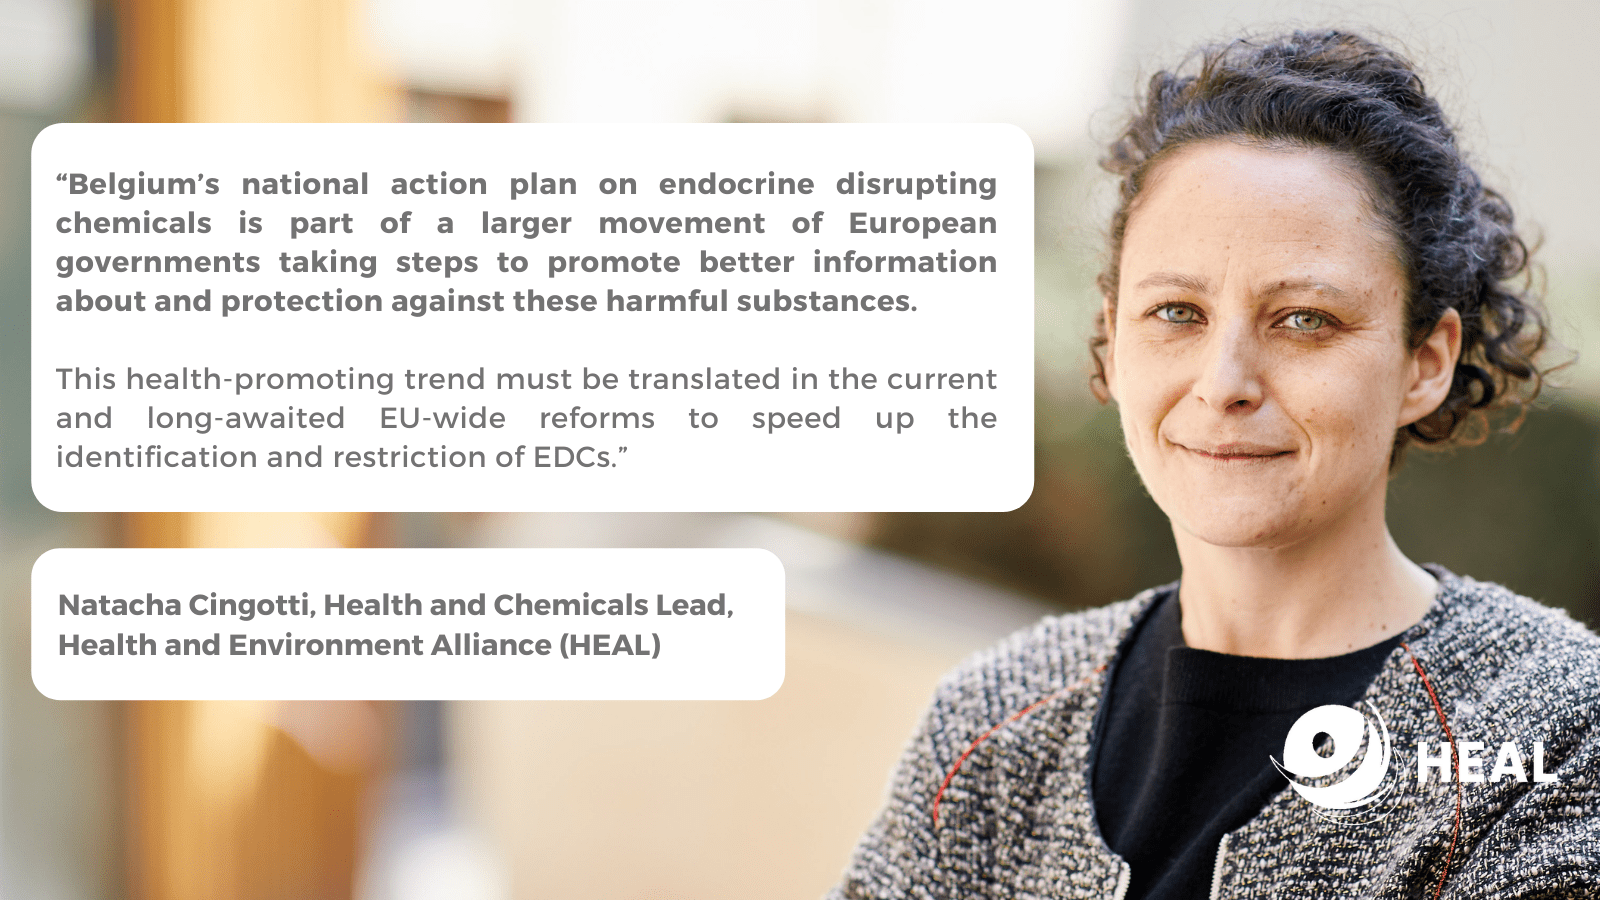 Belgium set to launch its first-ever national action plan to increase health and environment protection from endocrine disrupting chemicals